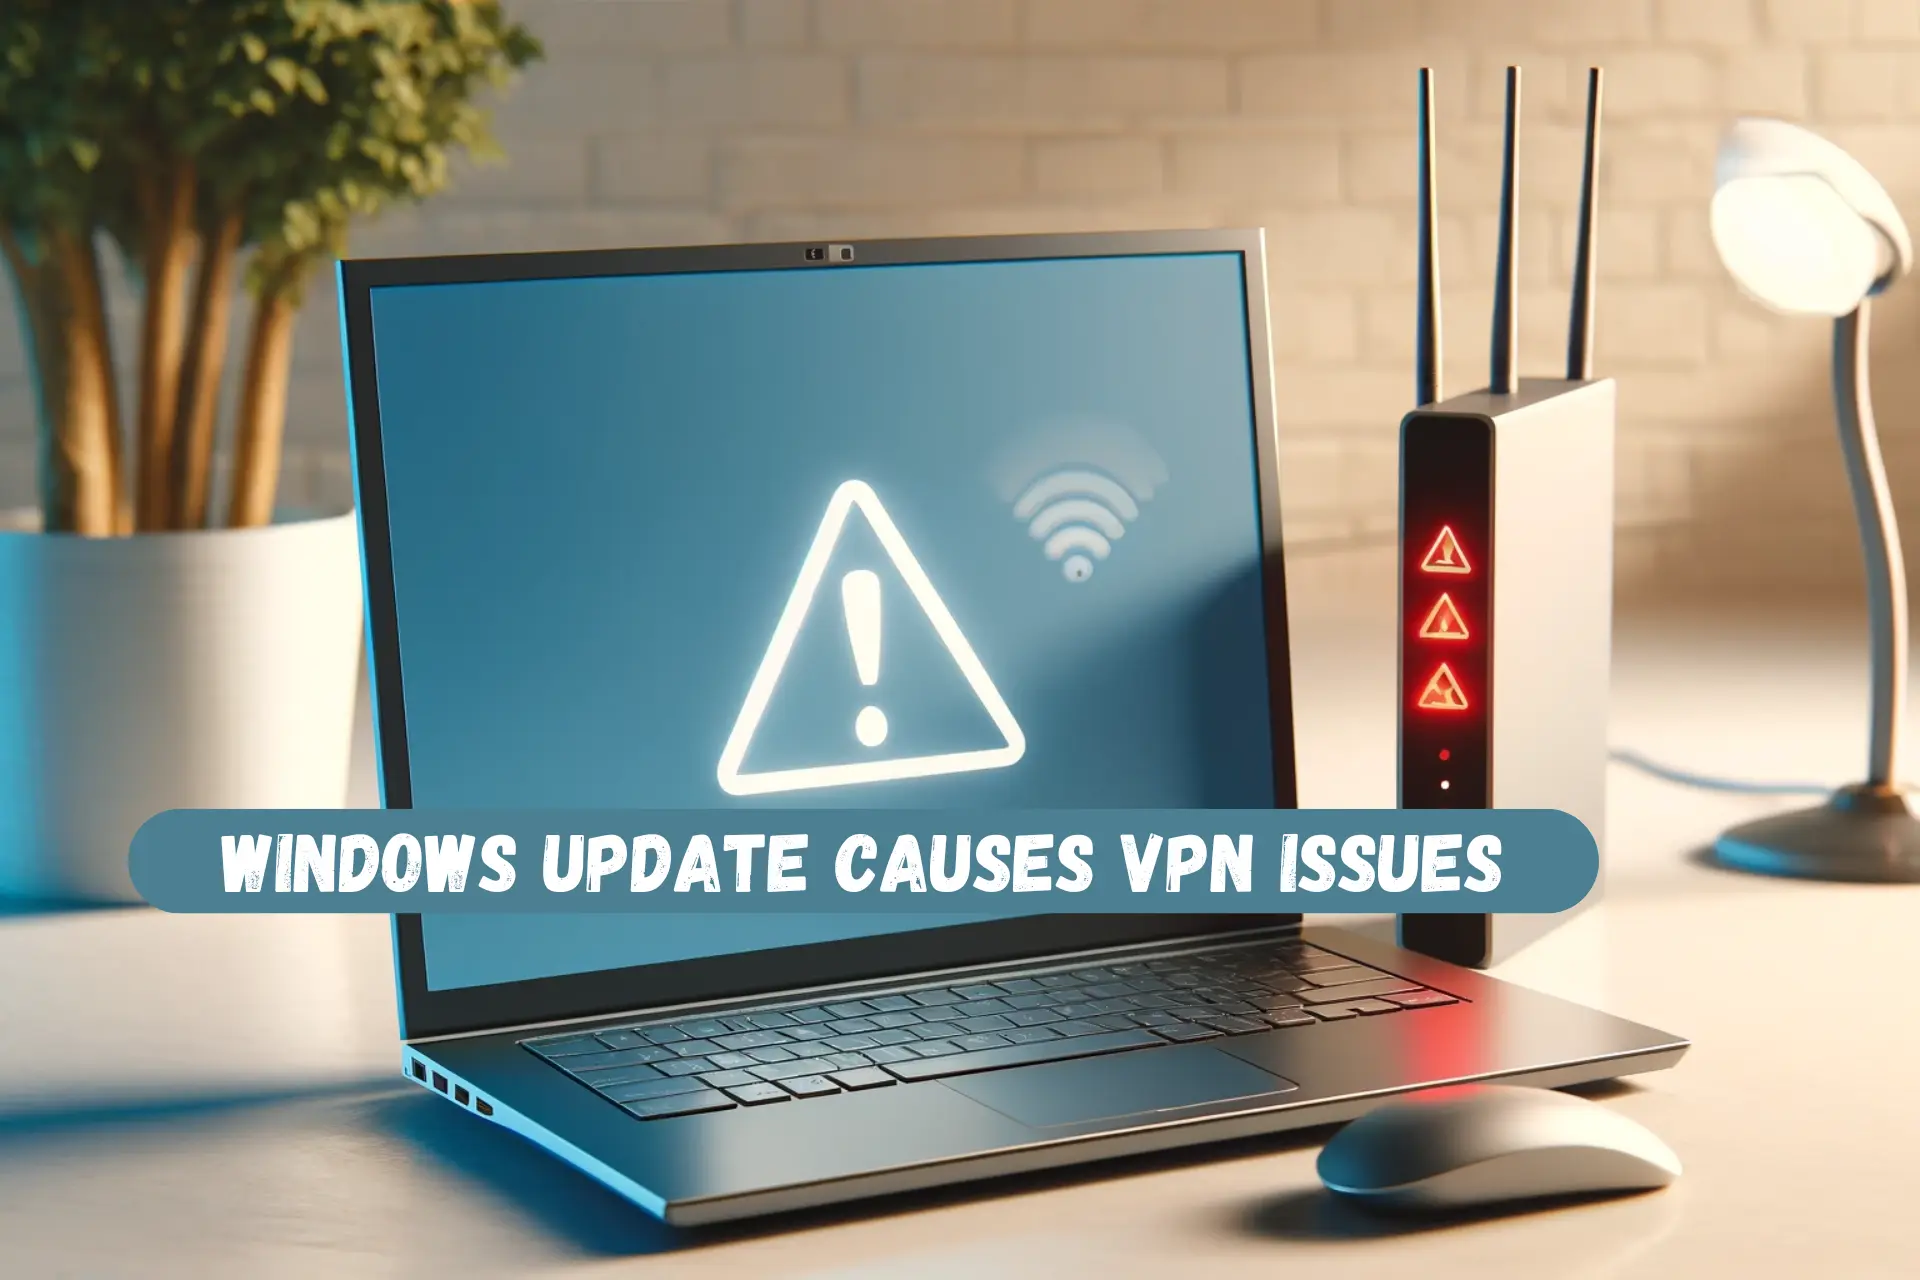 Microsoft Confirms KB5036892 Causes VPN Issues